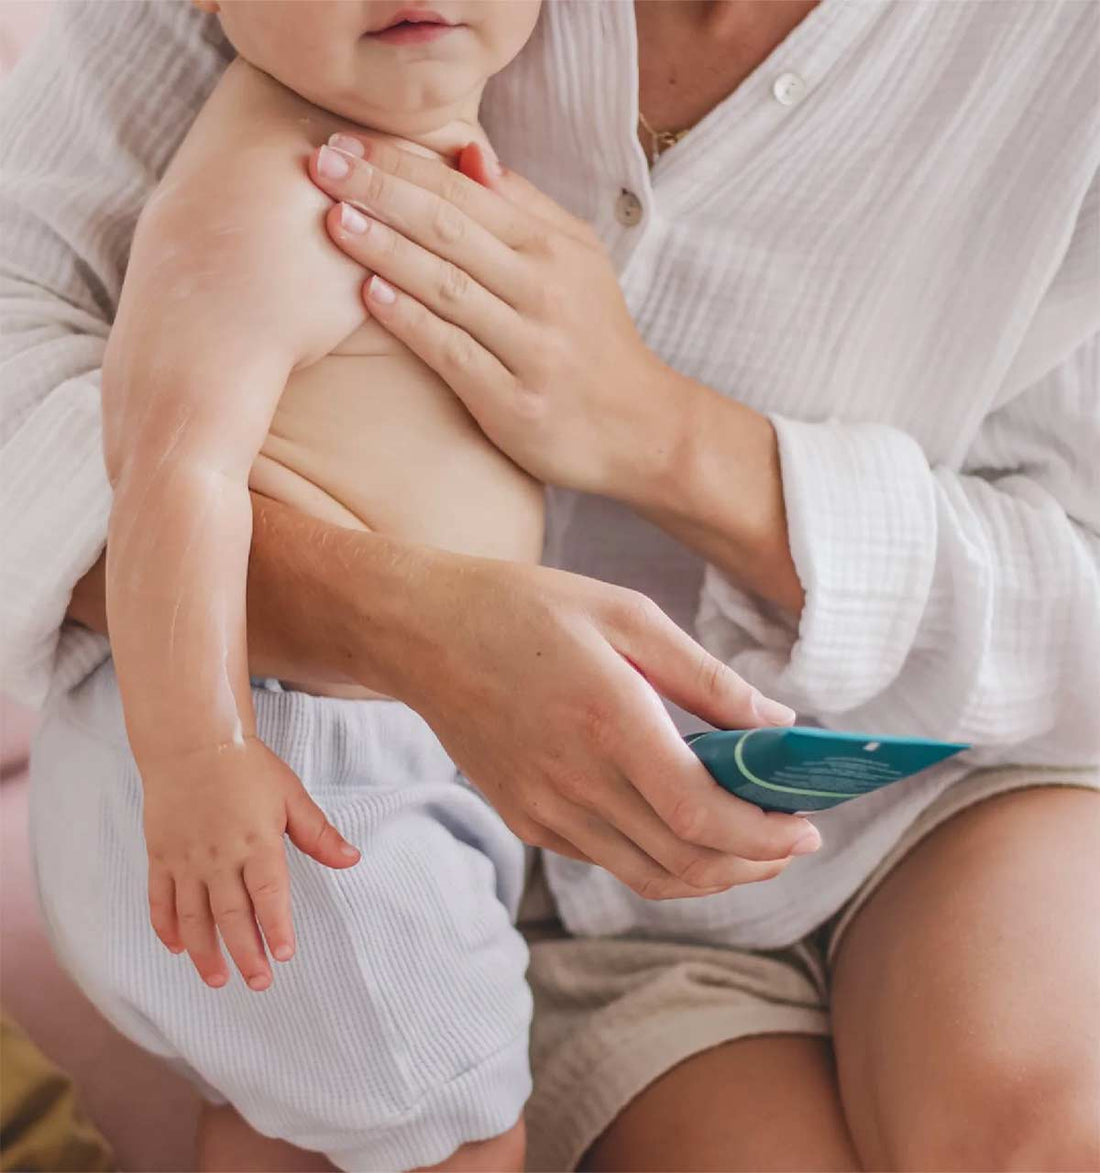  A woman holding a teal green bottle is sitting on a blush pink couch while she holds a baby upright with one of her hands on the baby's chest, suggesting that she is applying lotion.  